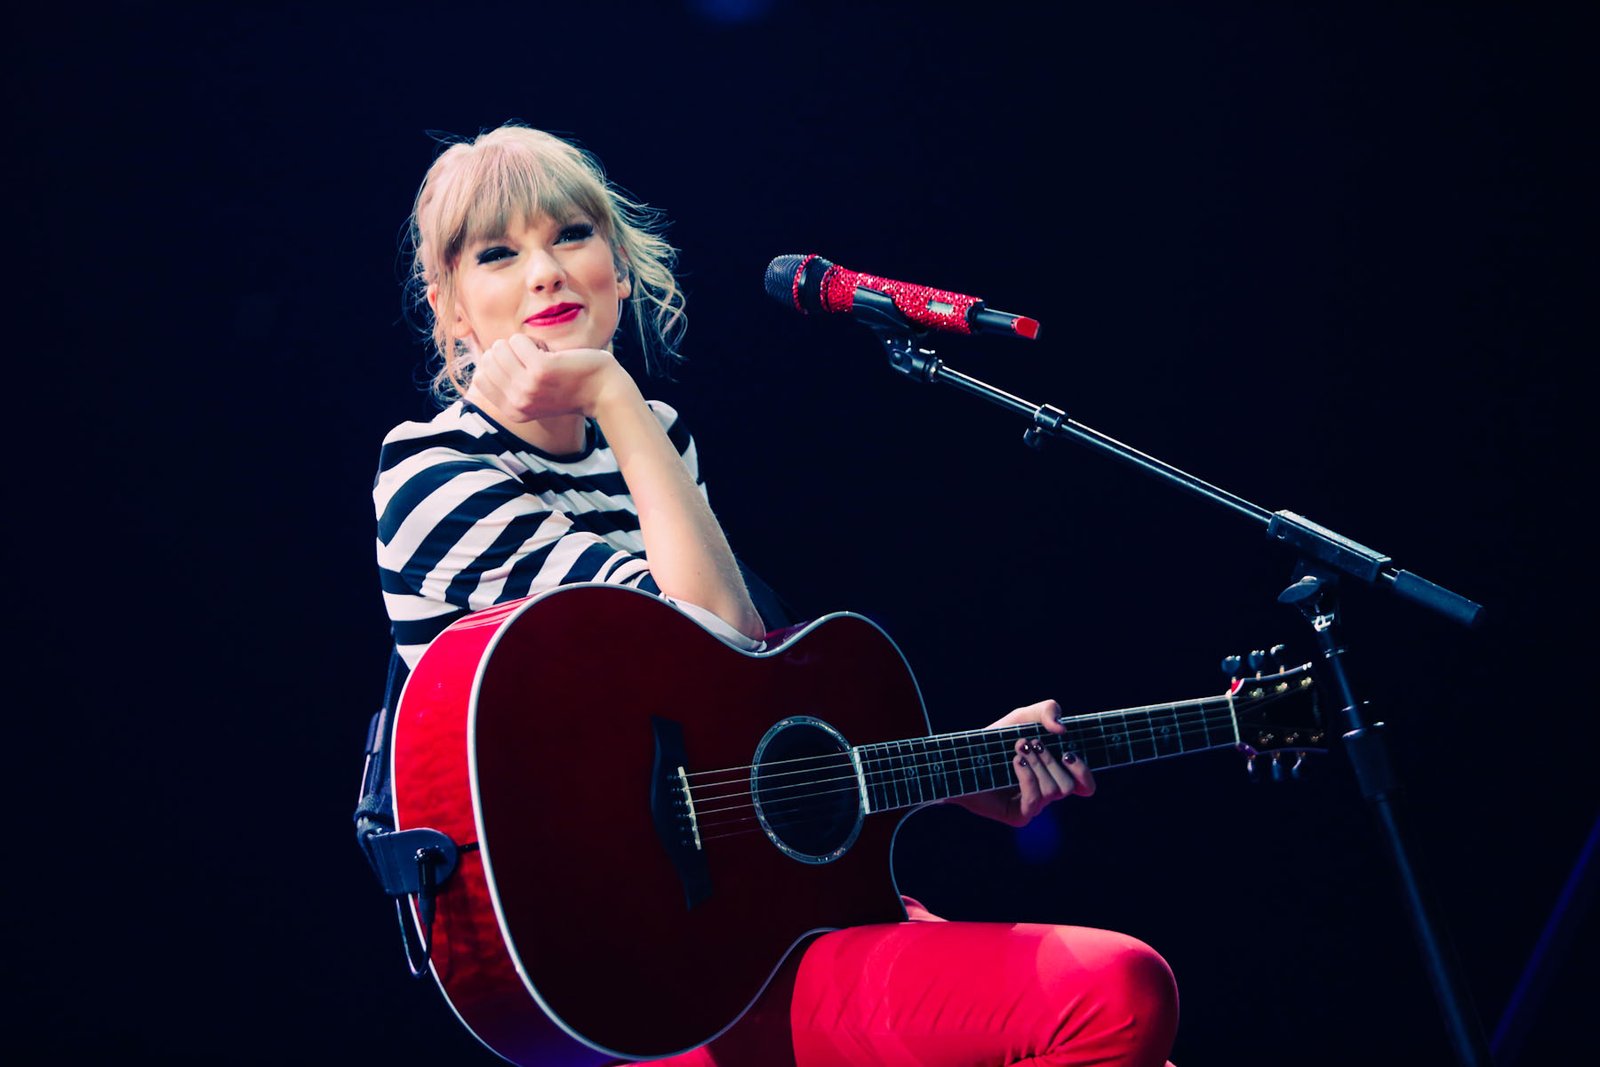 Learn Taylor Swift and Her Musical Life through her Songs in Two Minutes